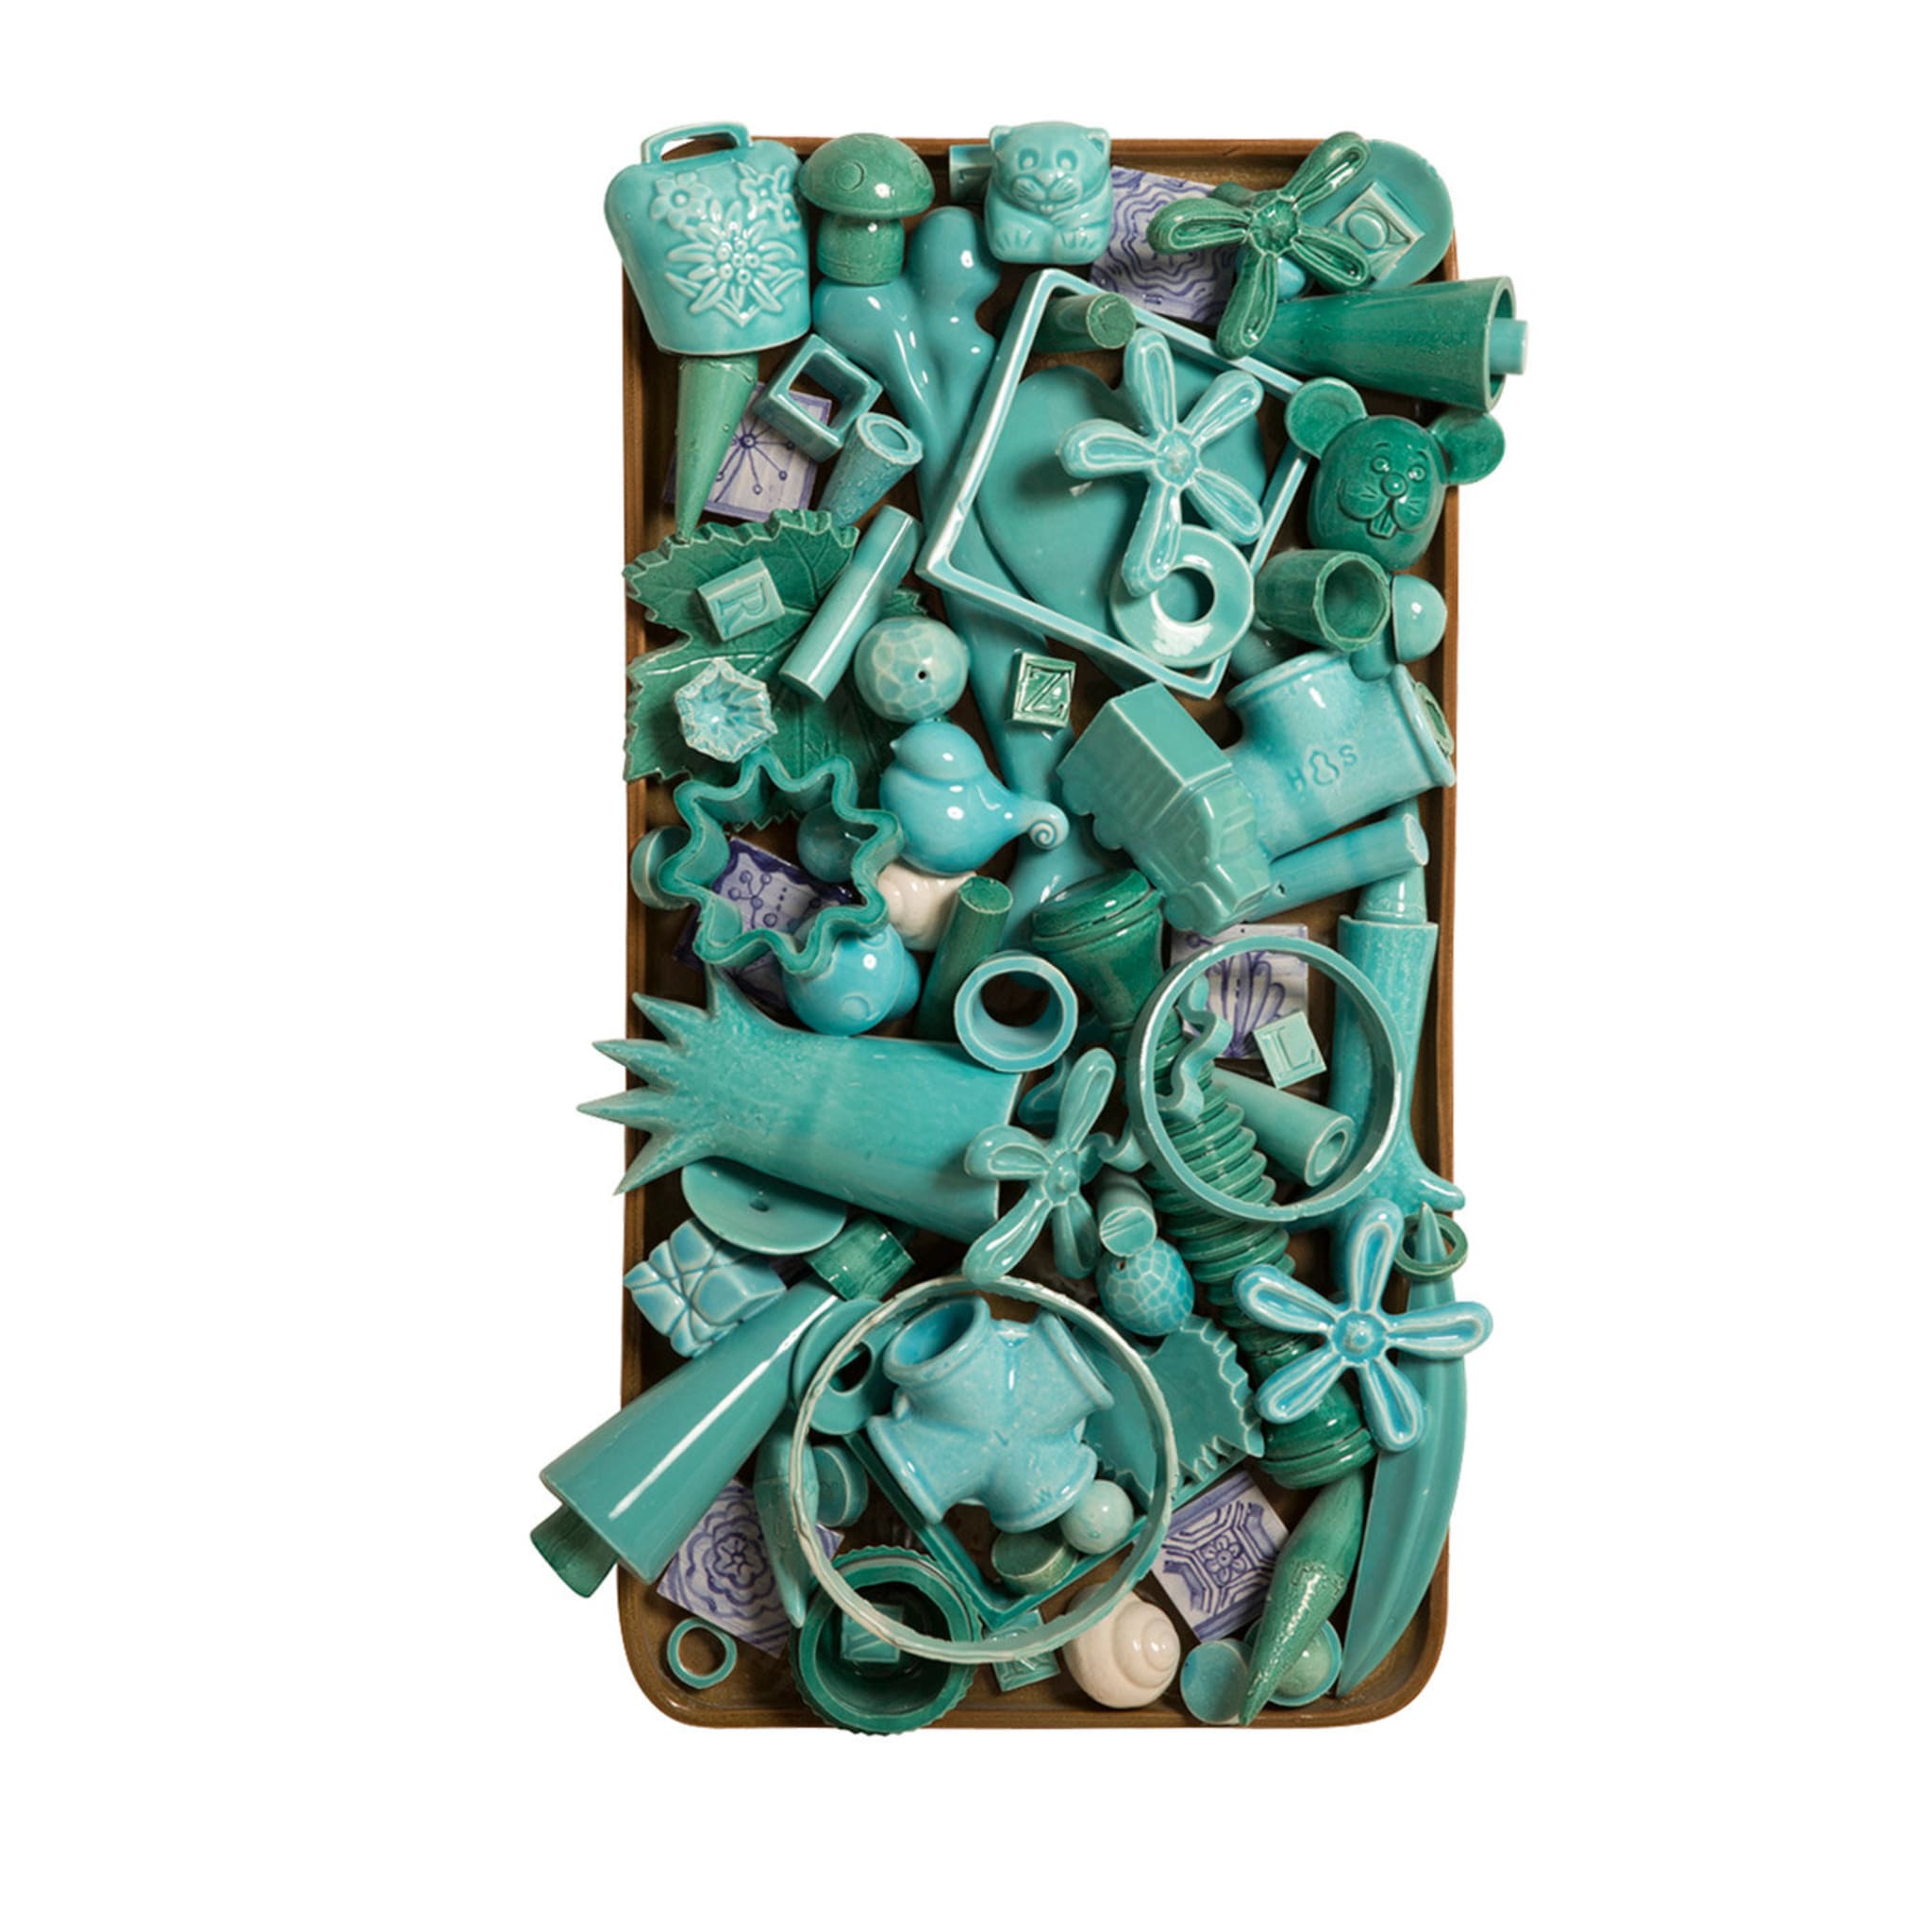 Turquoise Charms Wall Sculpture - Main view